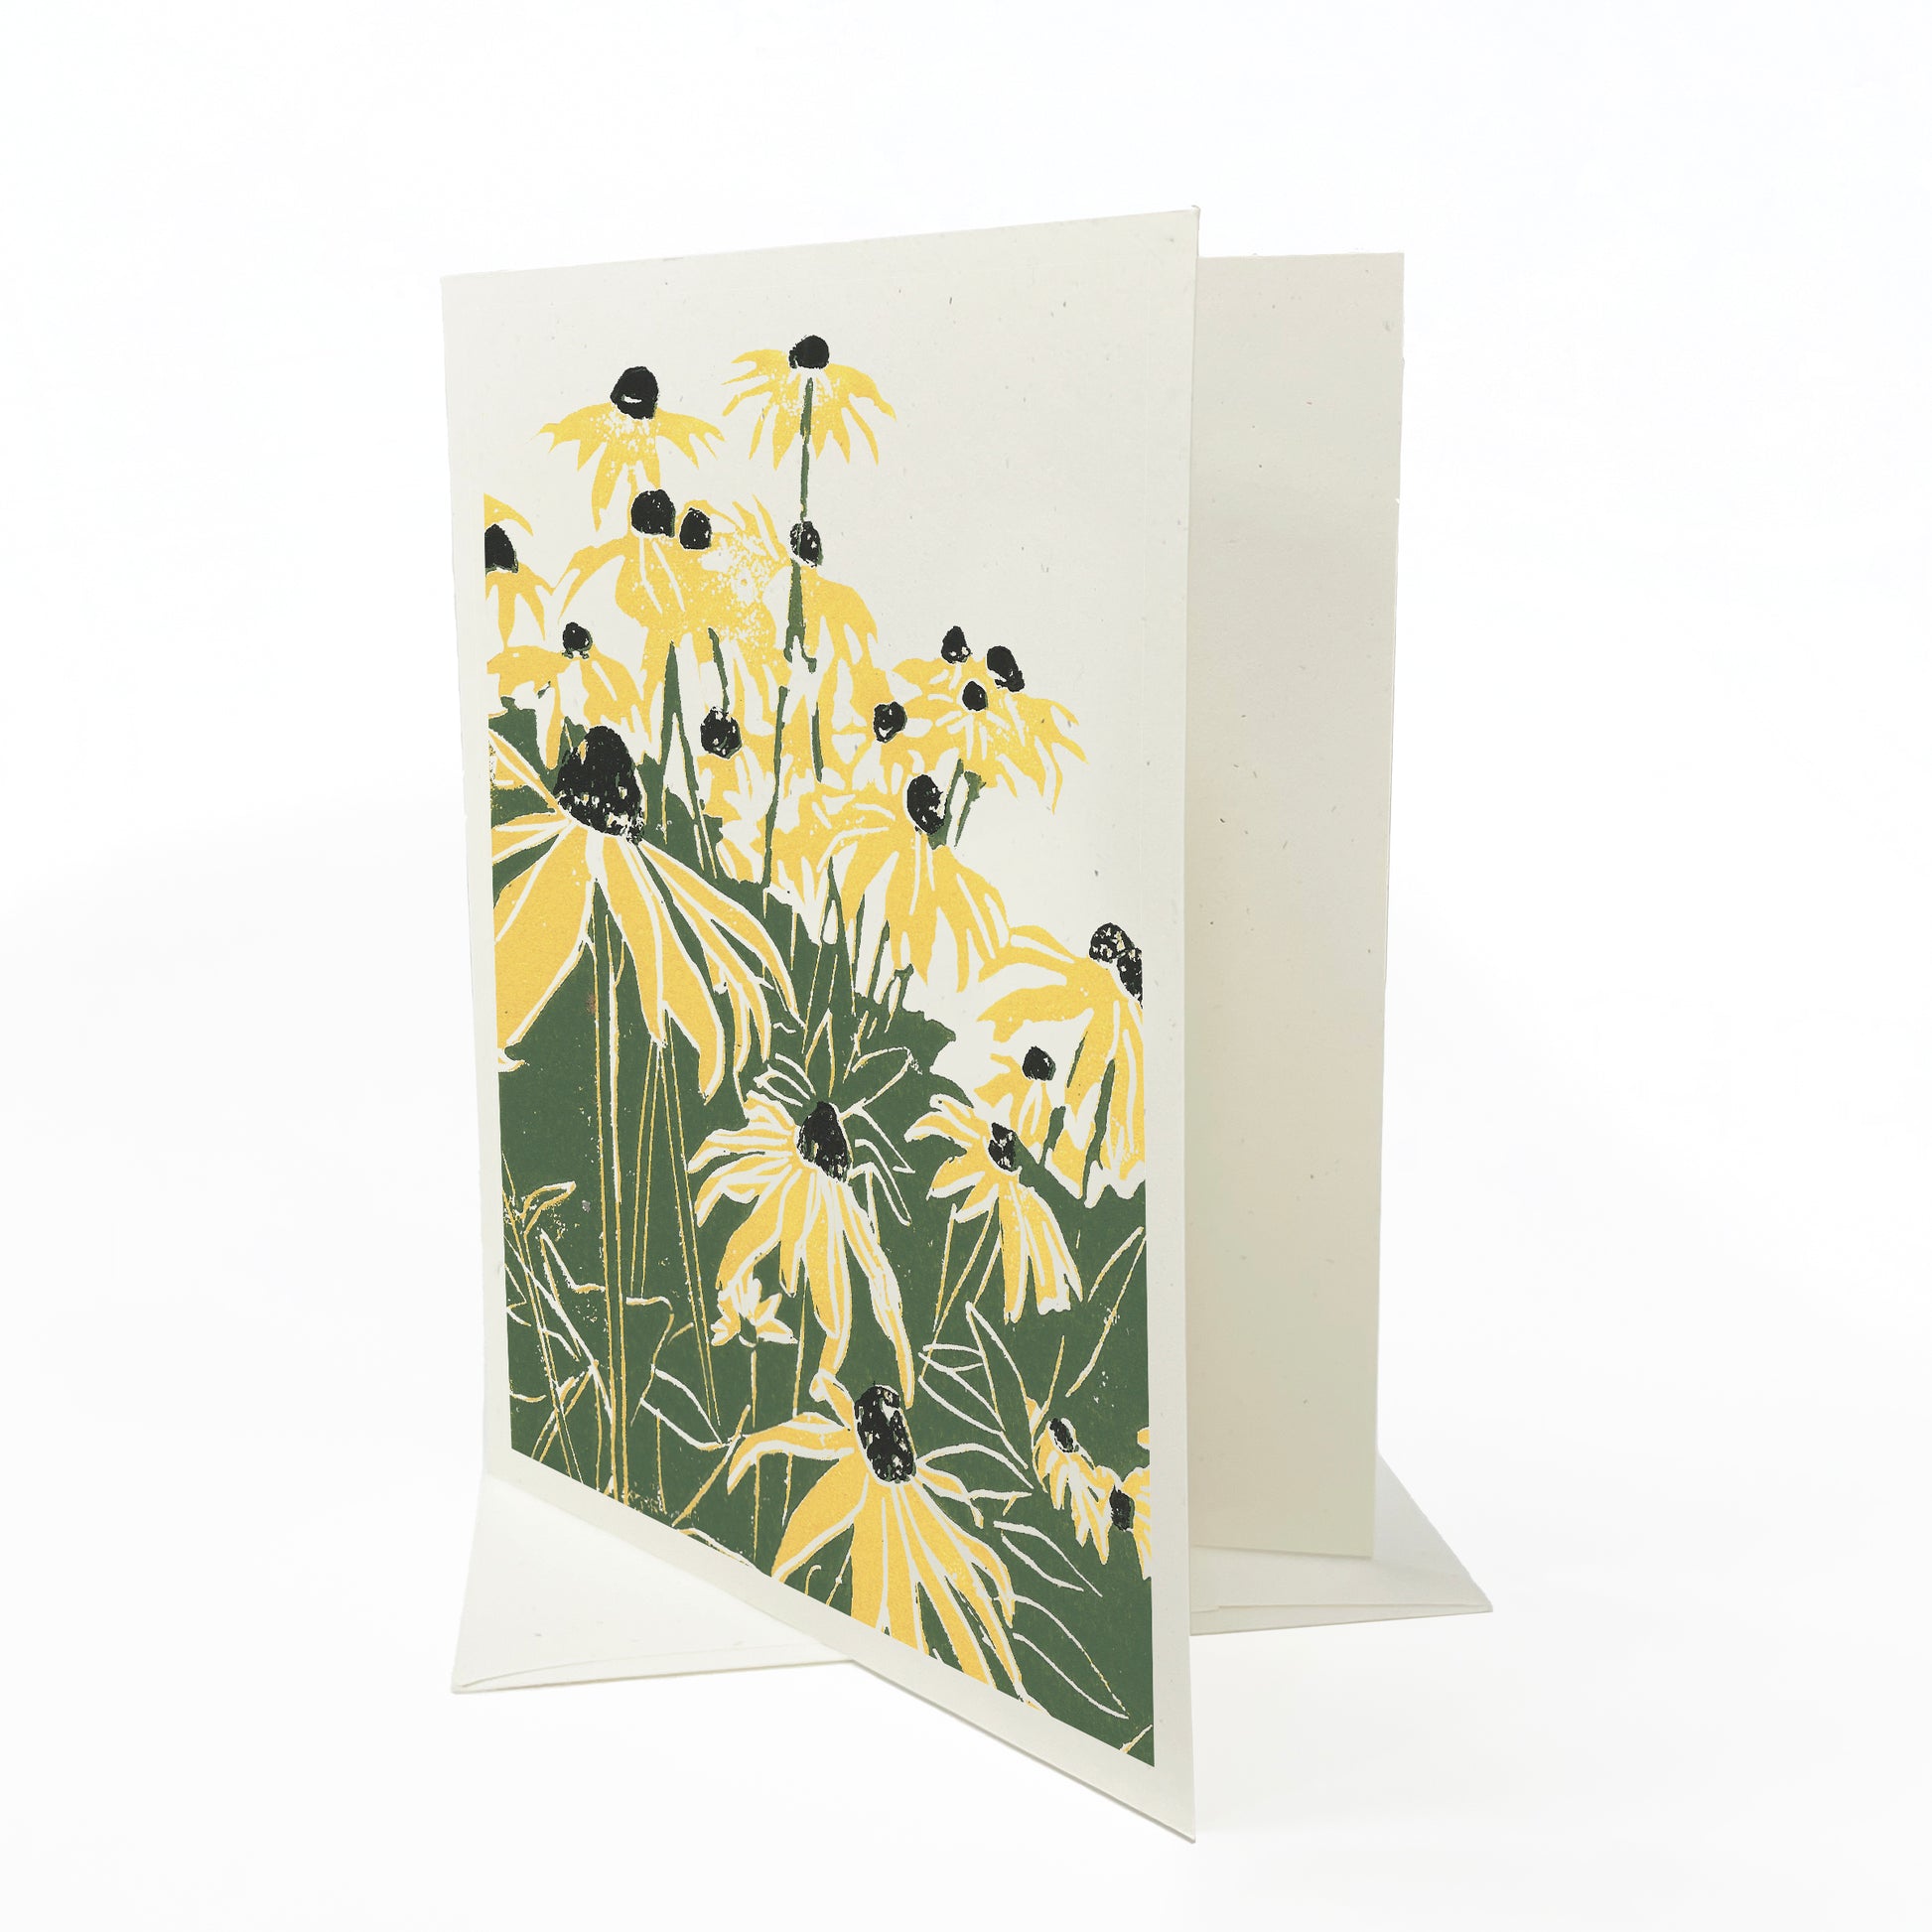 Black Eyed Susan's. A casually elegant card featuring a digital reproduction of a block print design with the same title by Natalia Wohletz of Peninsula Prints, Milford and Mackinac Island, Michigan.